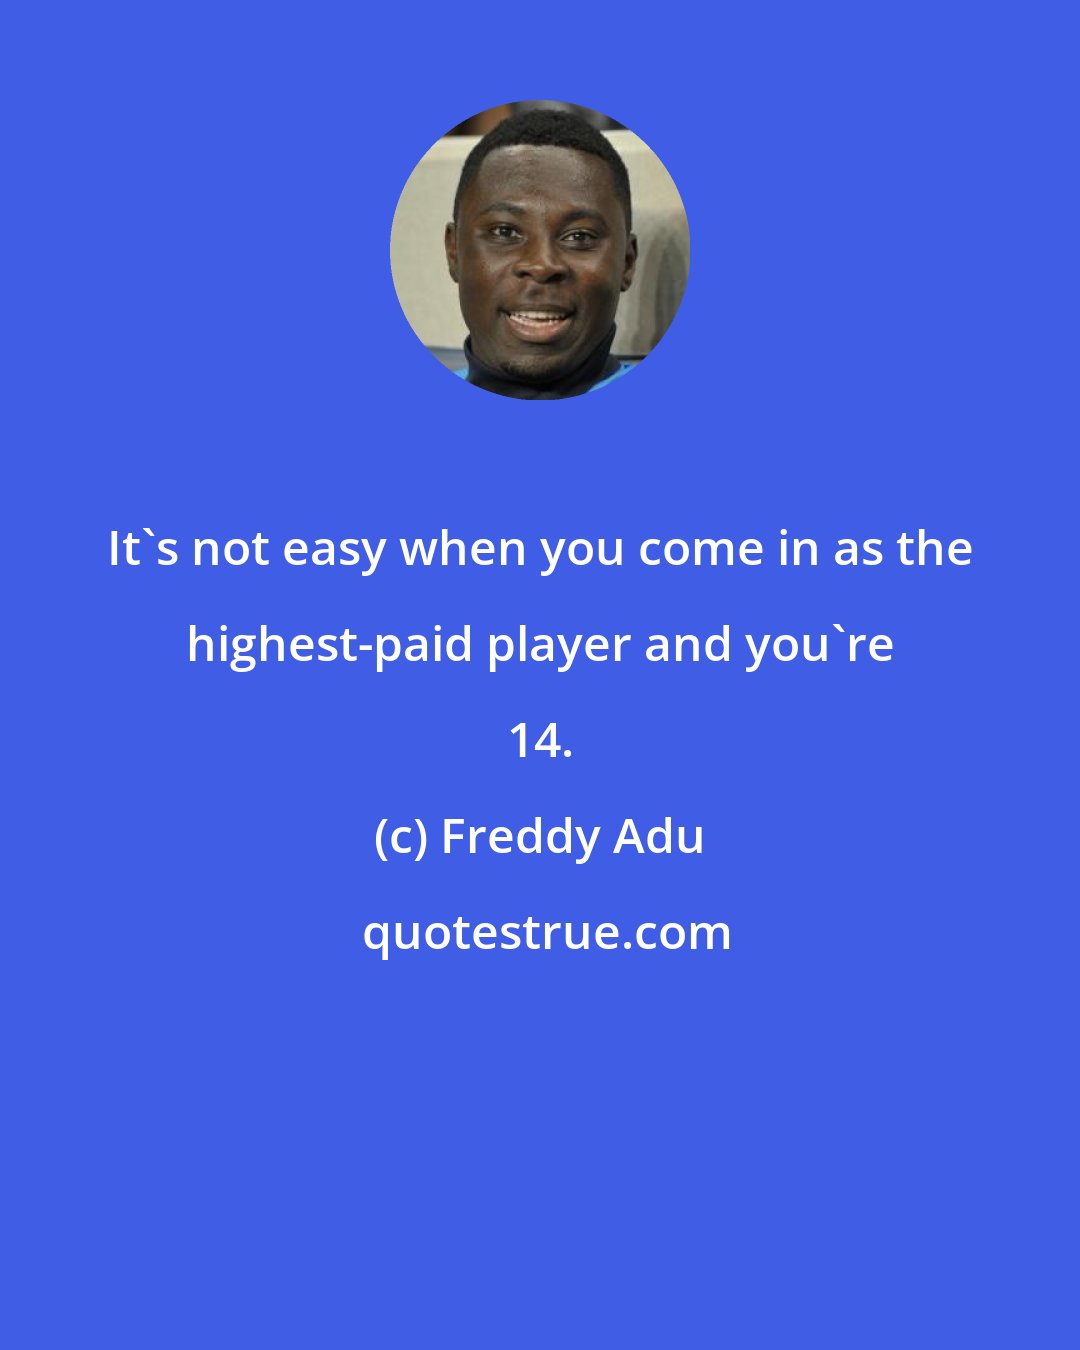 Freddy Adu: It's not easy when you come in as the highest-paid player and you're 14.